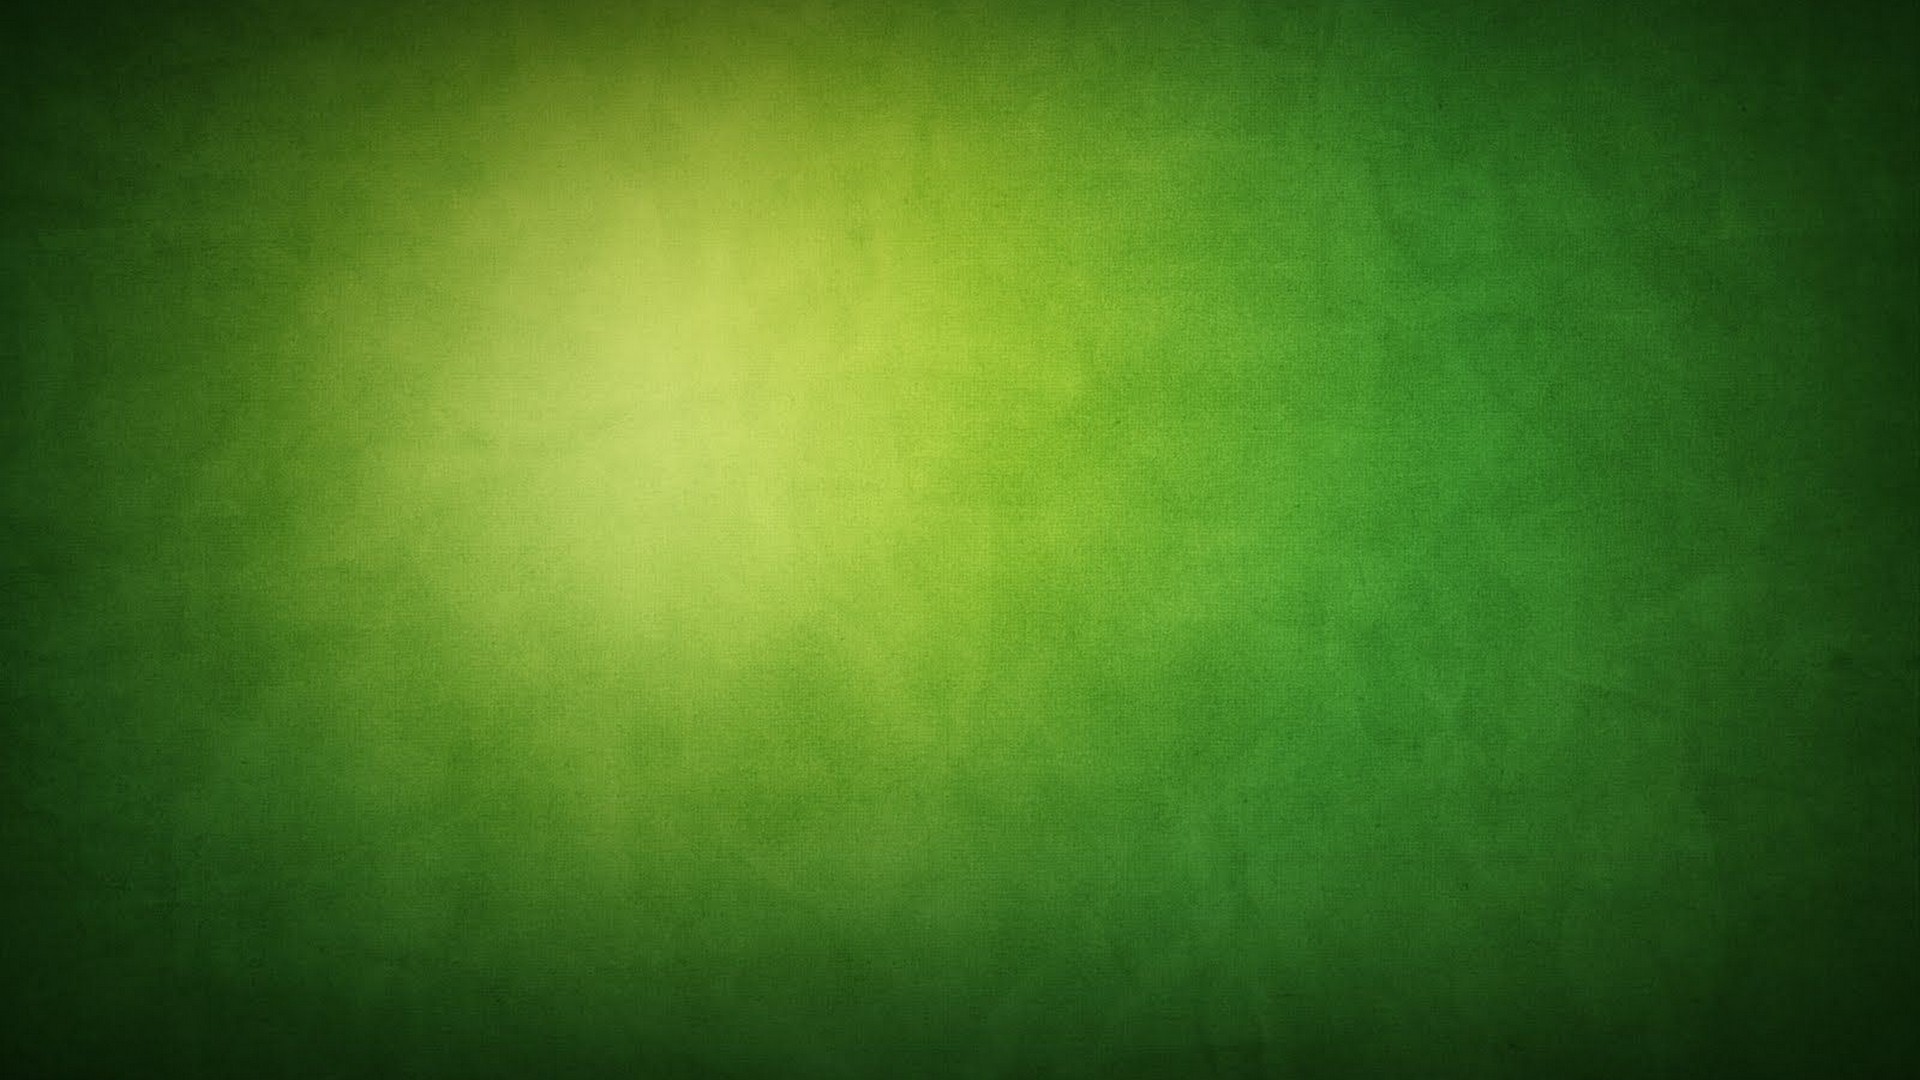 Dark Green Desktop Backgrounds HD with resolution 1920X1080 pixel. You can use this wallpaper as background for your desktop Computer Screensavers, Android or iPhone smartphones